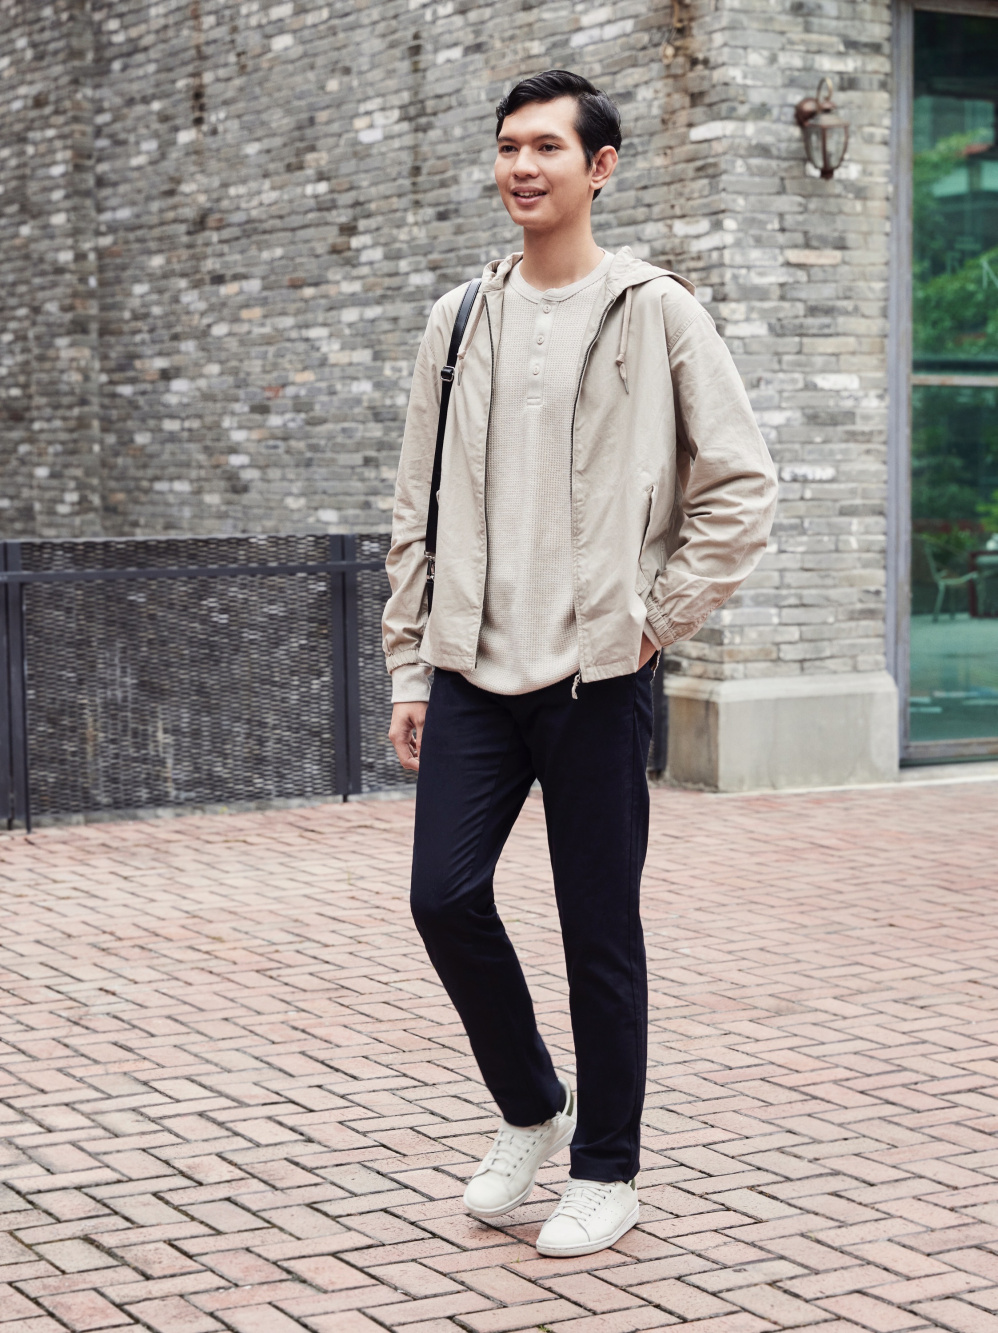 Check styling ideas for「SLIM FIT CHINO PANTS」